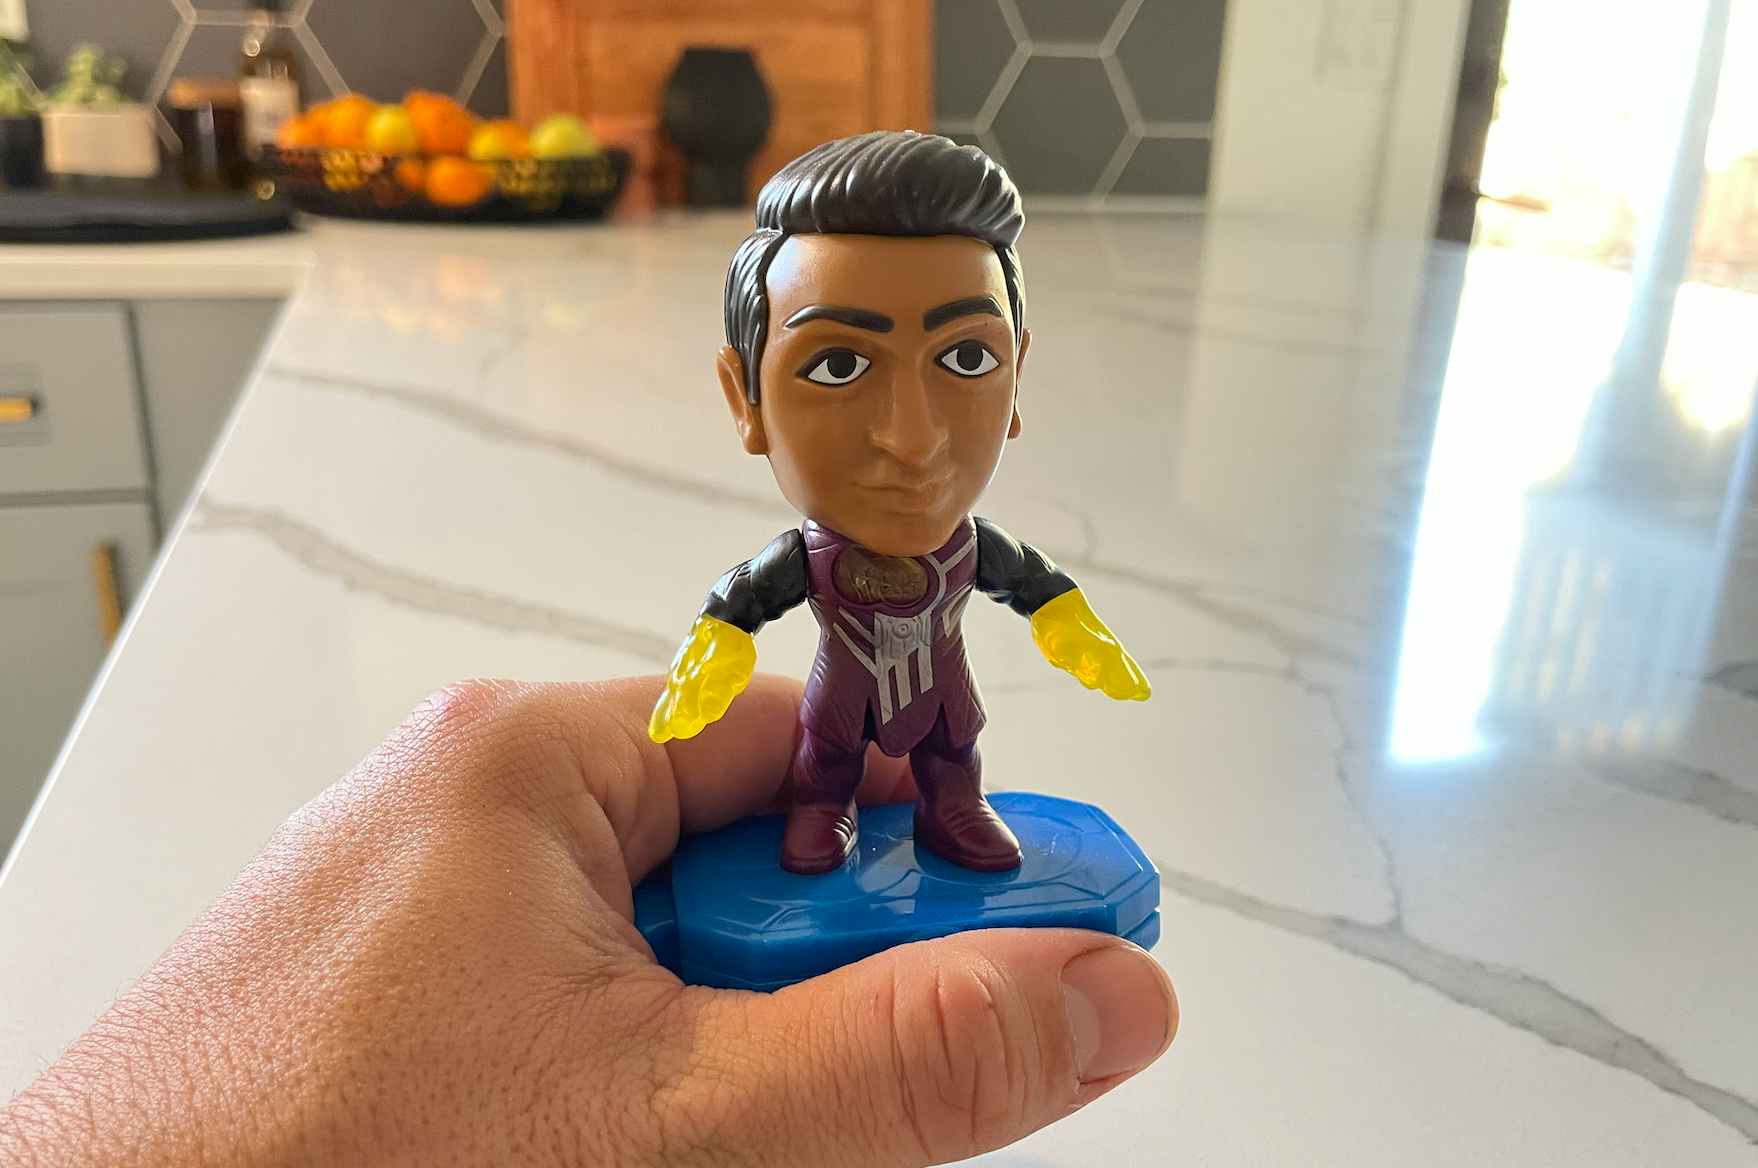 A person's hand holding a McDonald's Happy Meal toy (Kingo from The Eternals) in front of a kitchen counter.